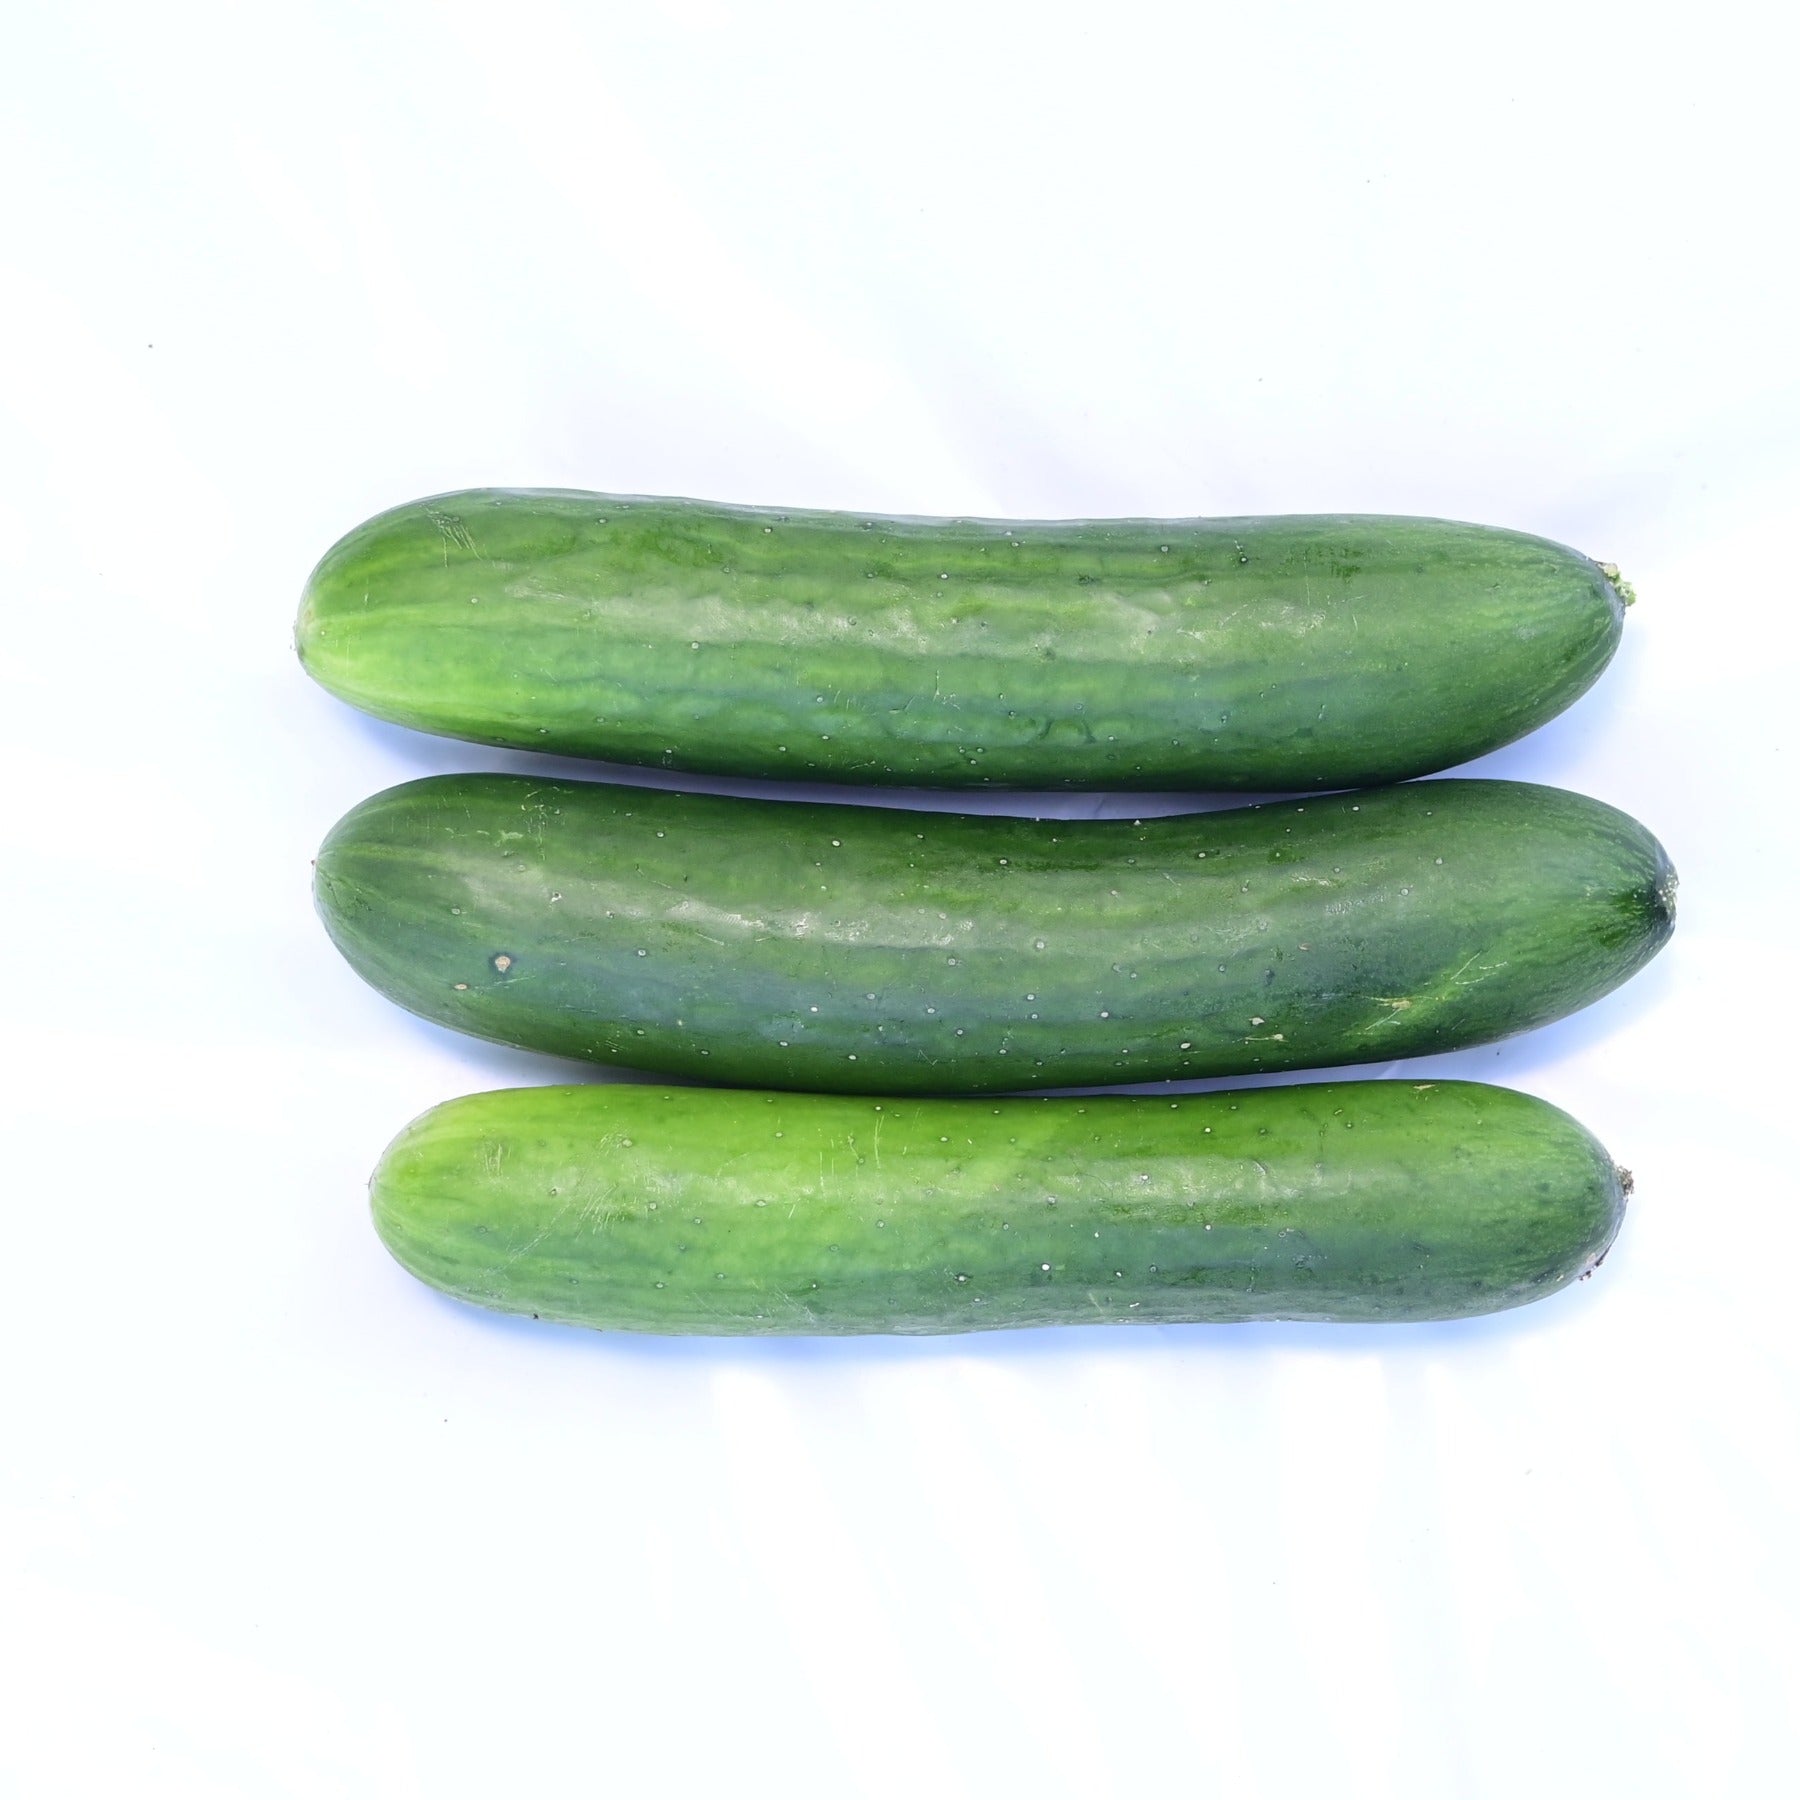 Green Finger Cucumber after harvest displayed against a white background